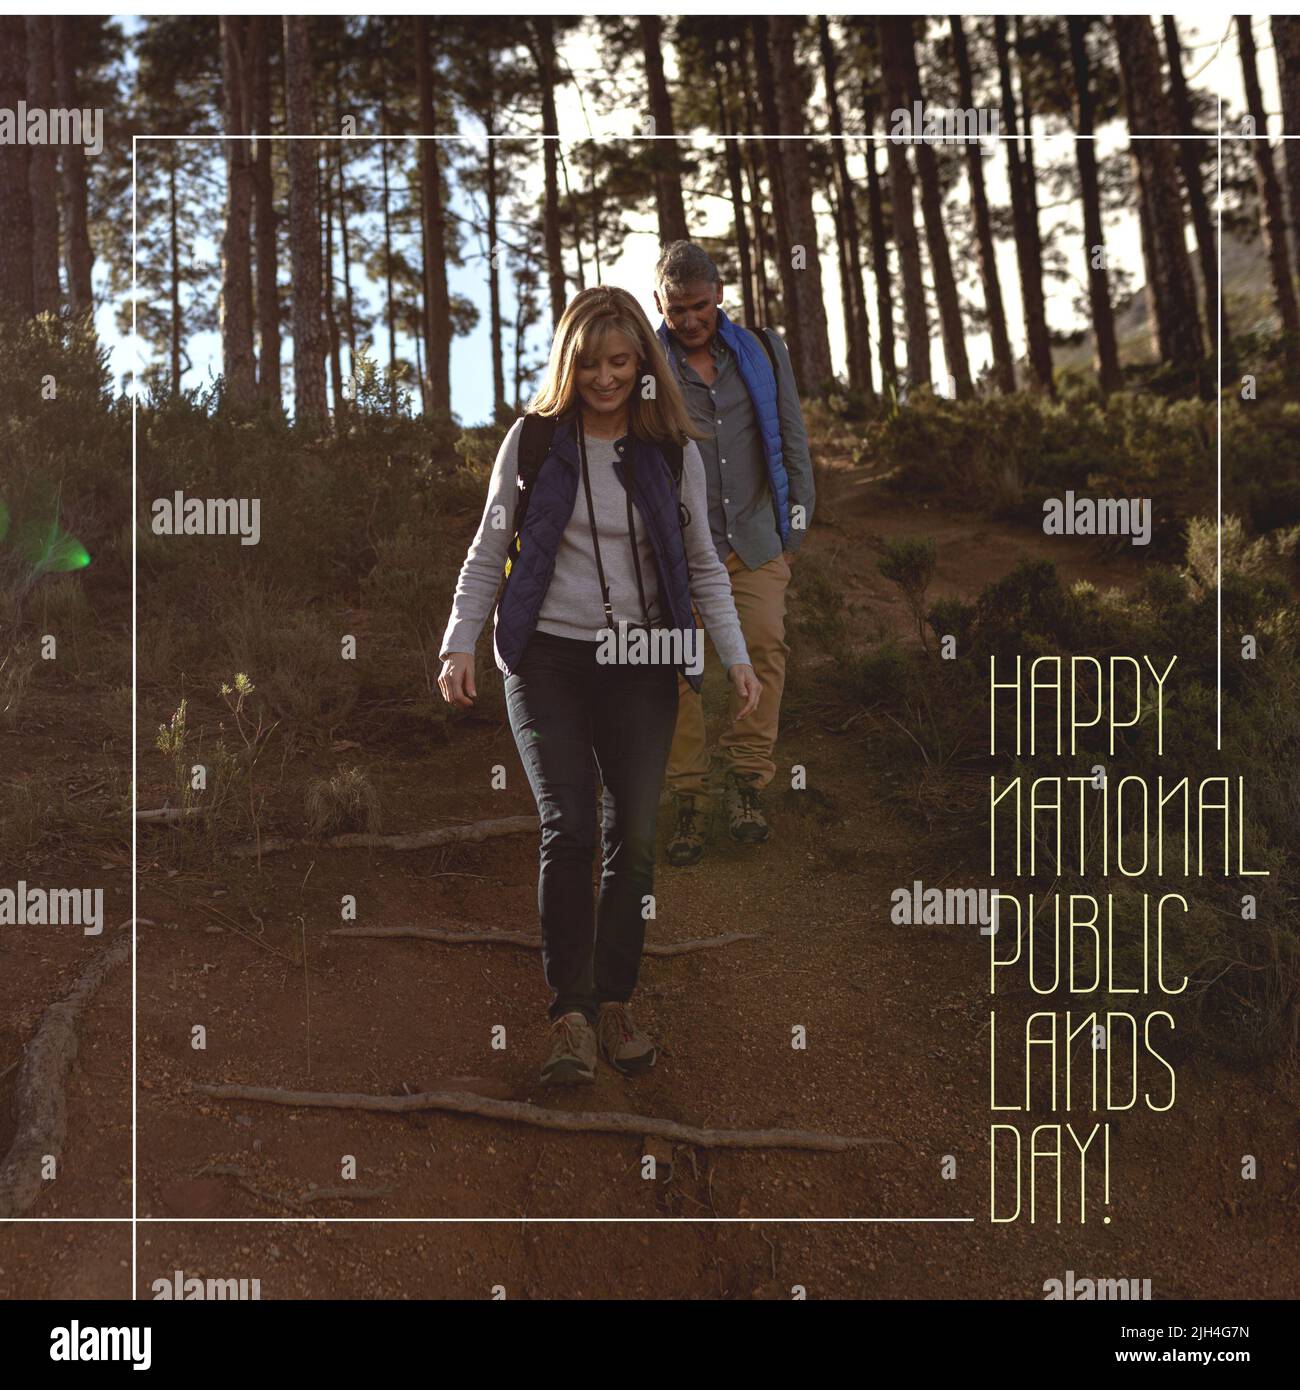 Composition of happy national public lands day text with caucasian couple hiking Stock Photo